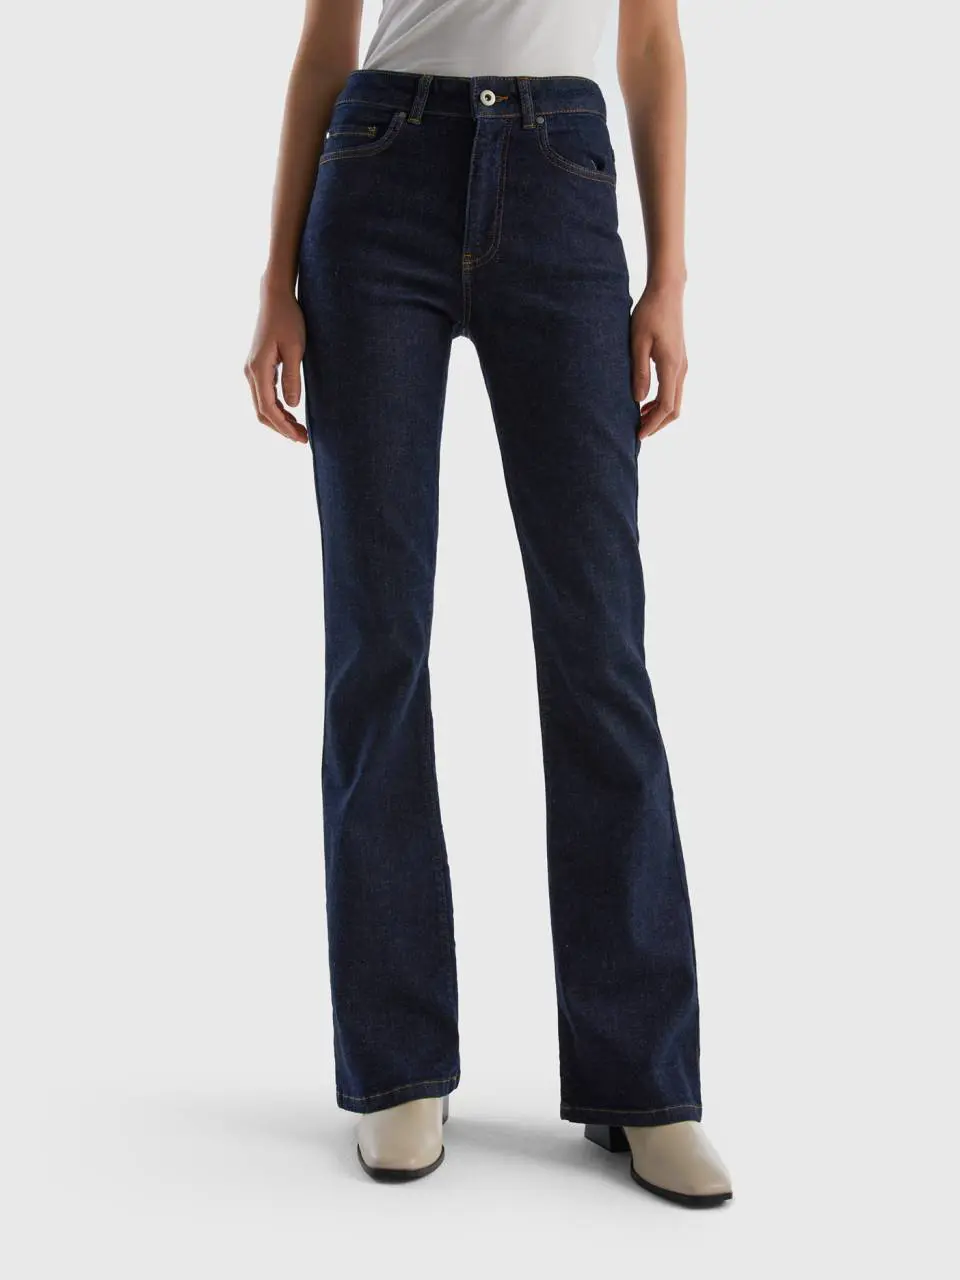 Benetton stretch flared jeans. 1